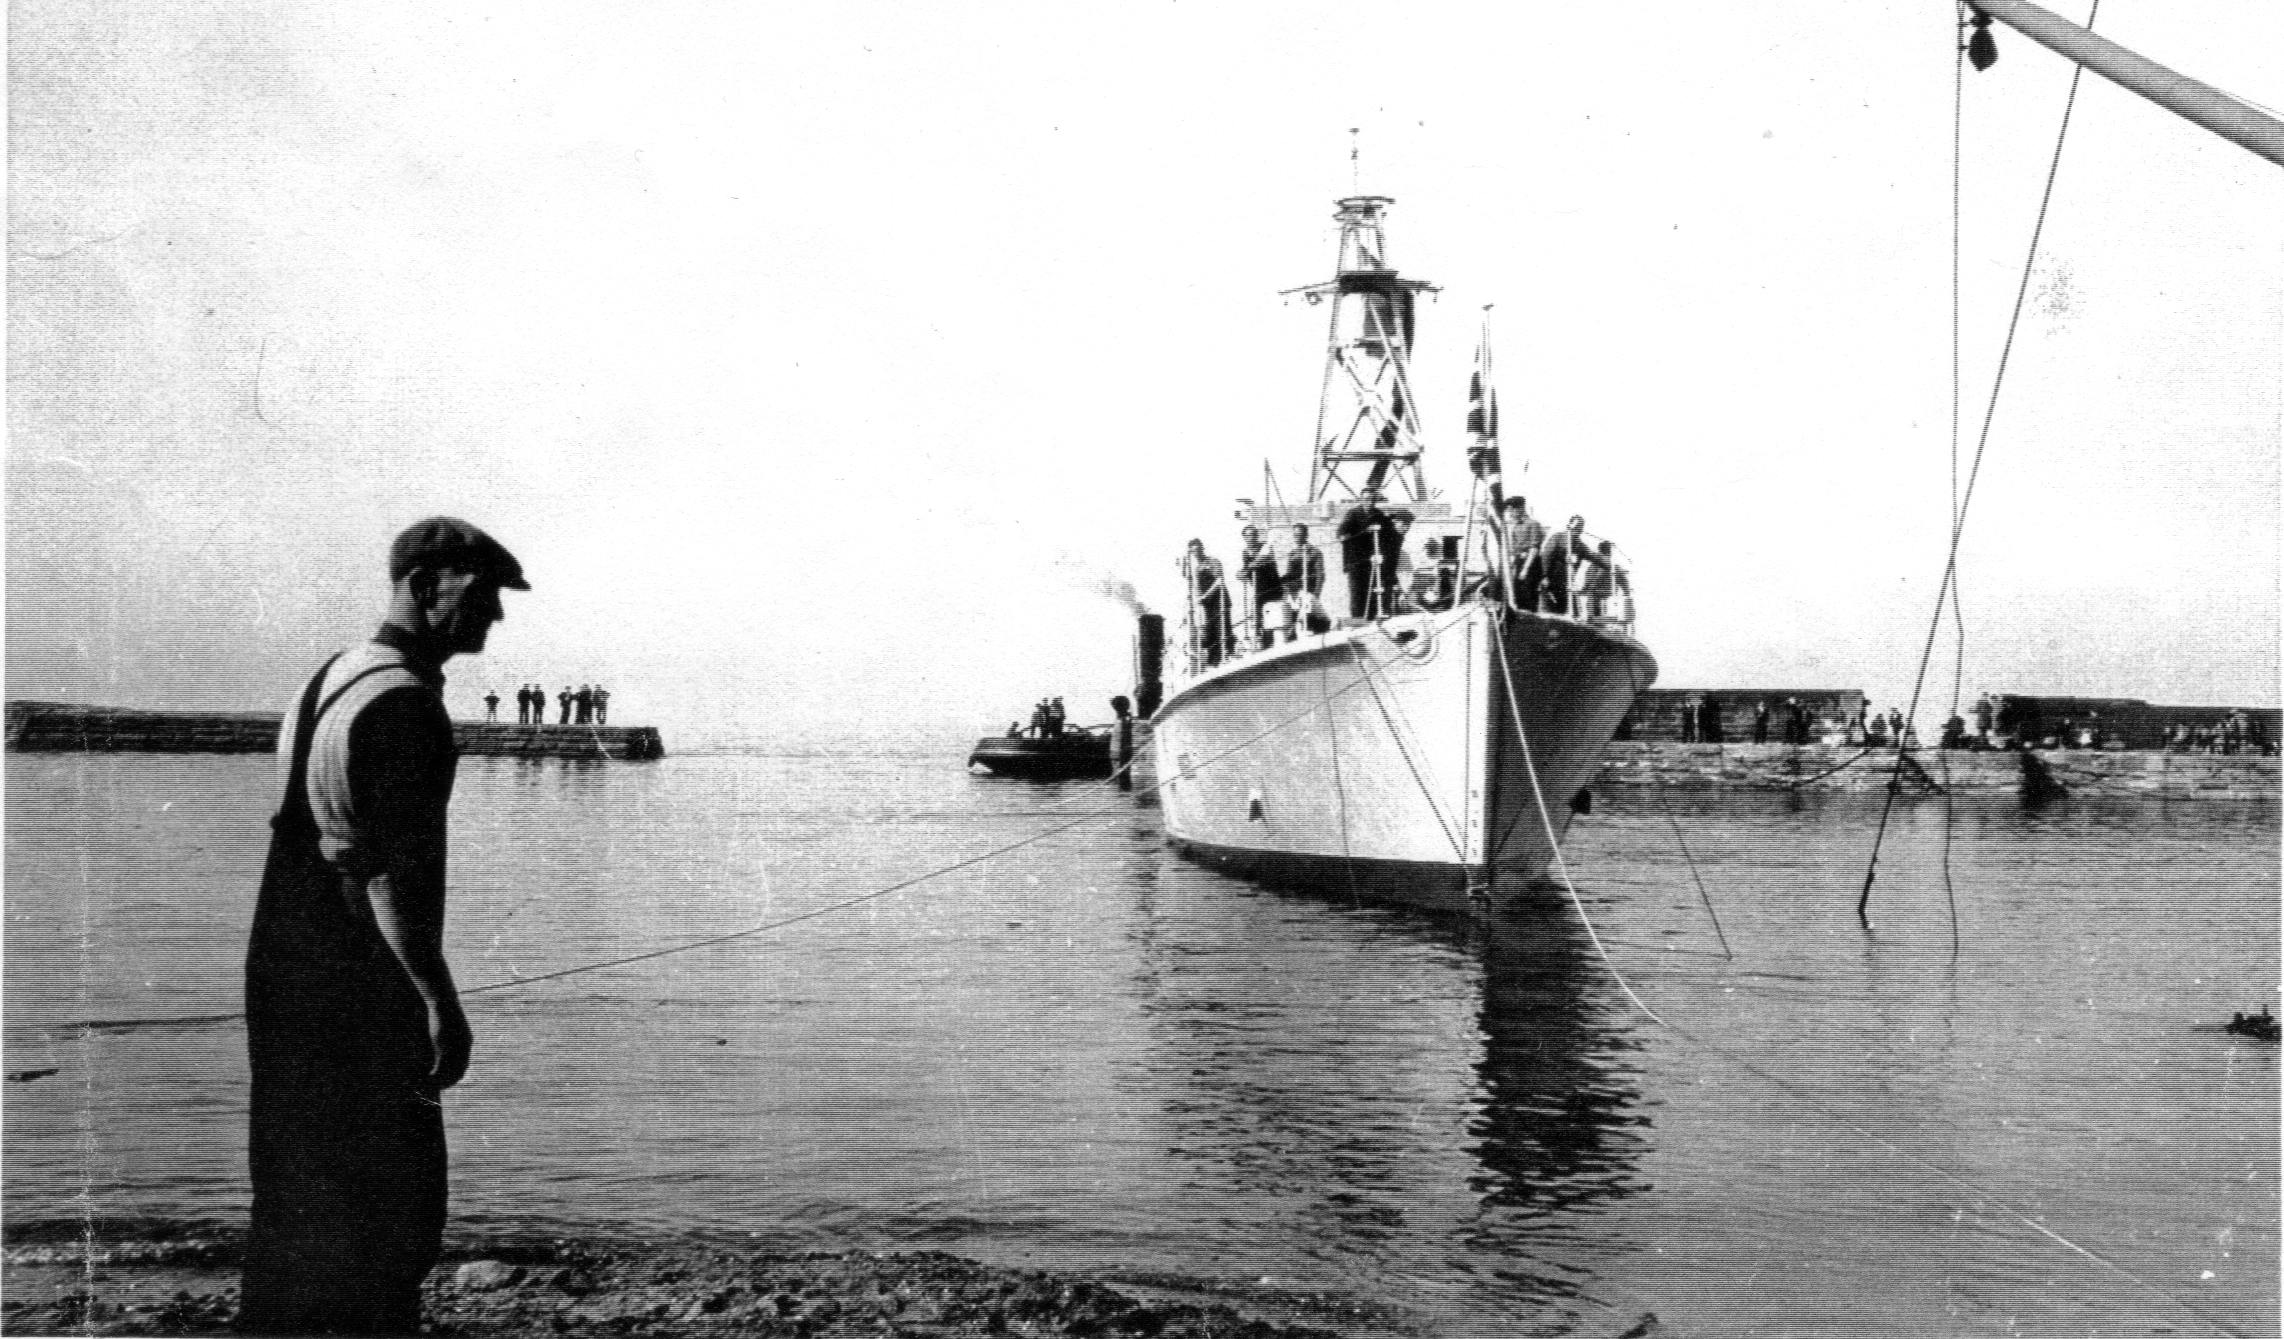 A Weatherhead's launch newly in the water.jpg